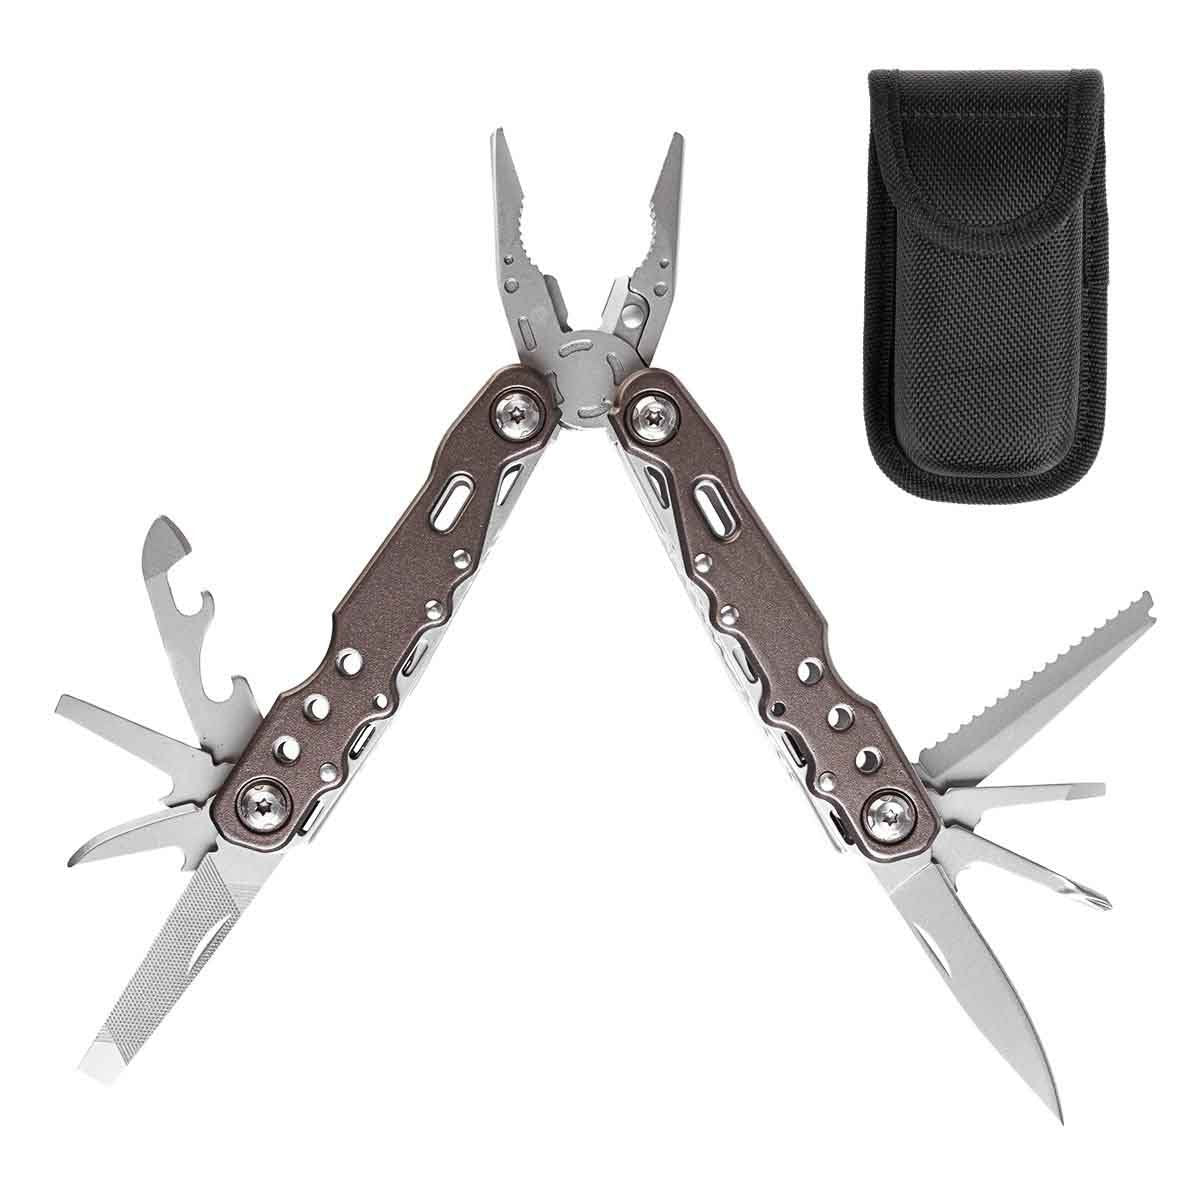 Compact 7-in-1 Pliers Multitool for Home and Outdoor with a belt storage case